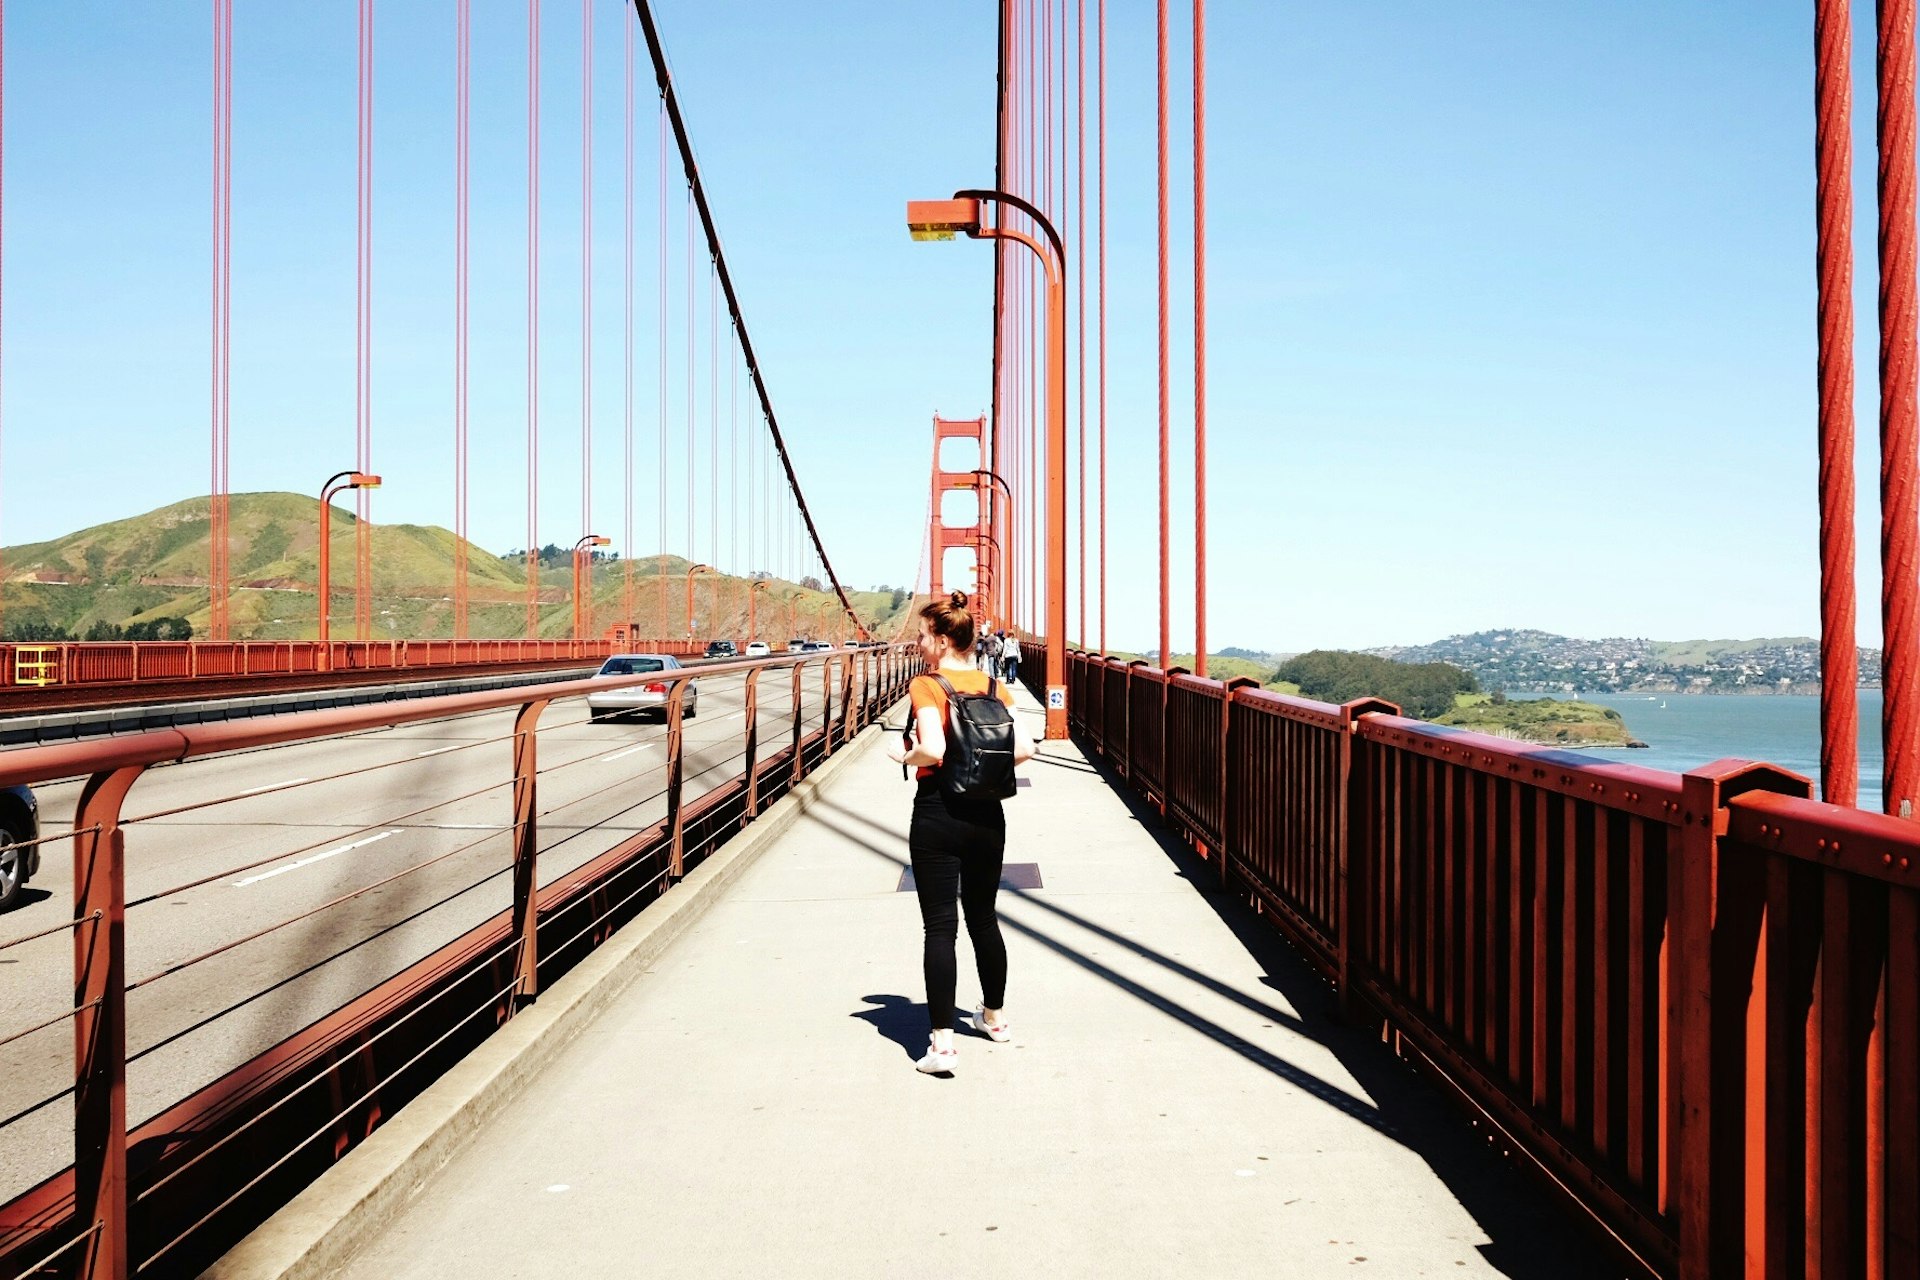 A woman walks along a pedestrian path at the side of a road on a large orange-colored suspension bridge